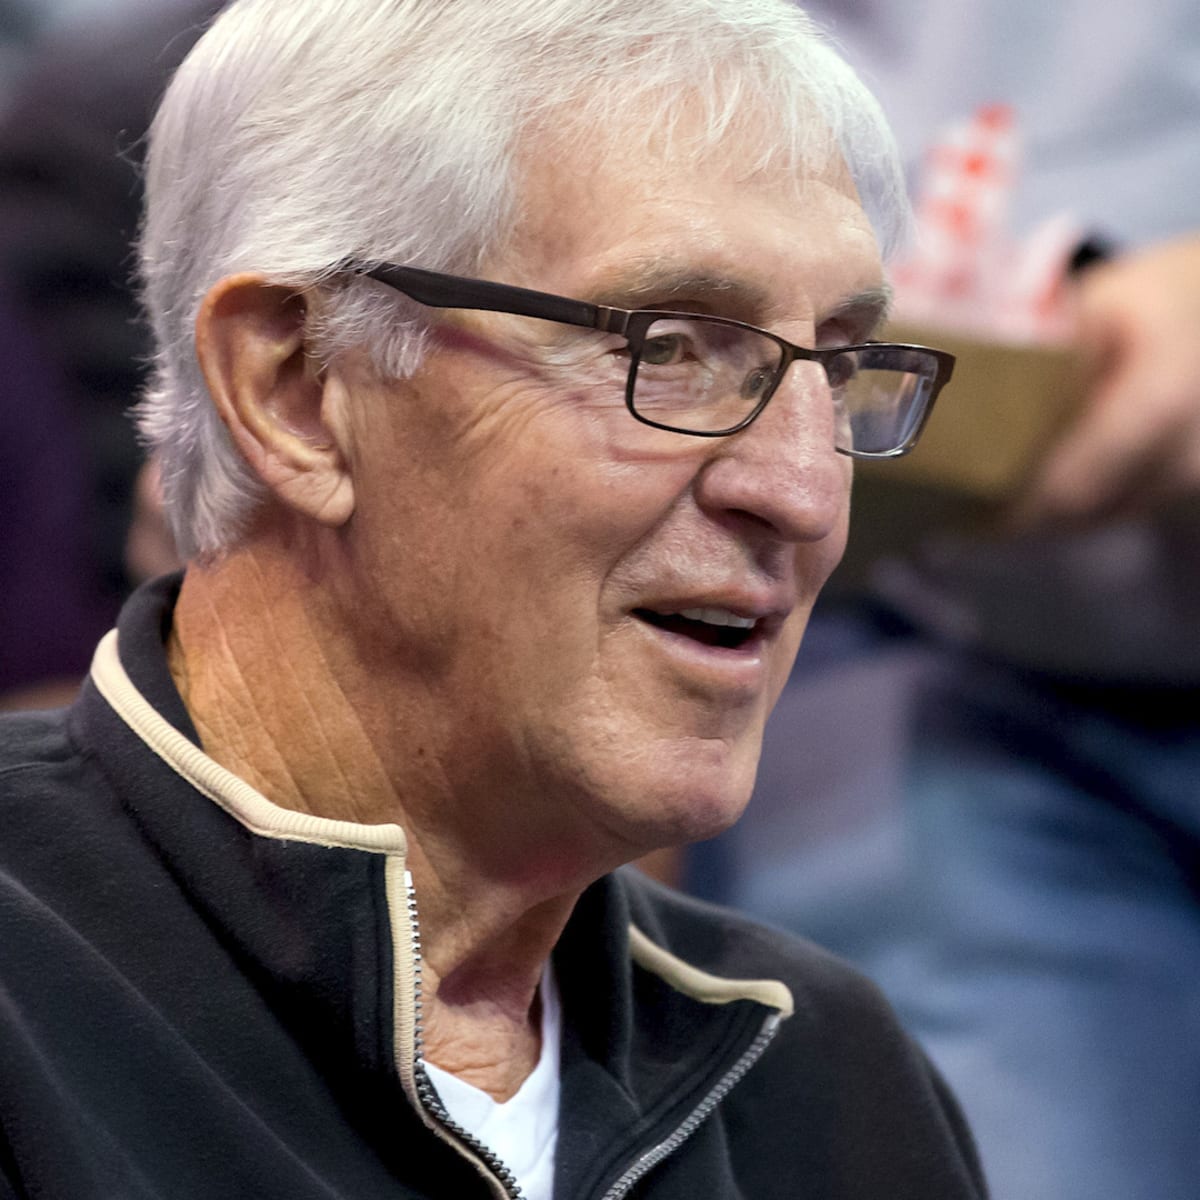 Jerry Sloan, Utah Jazz great and Hall of Fame coach, dies at 78